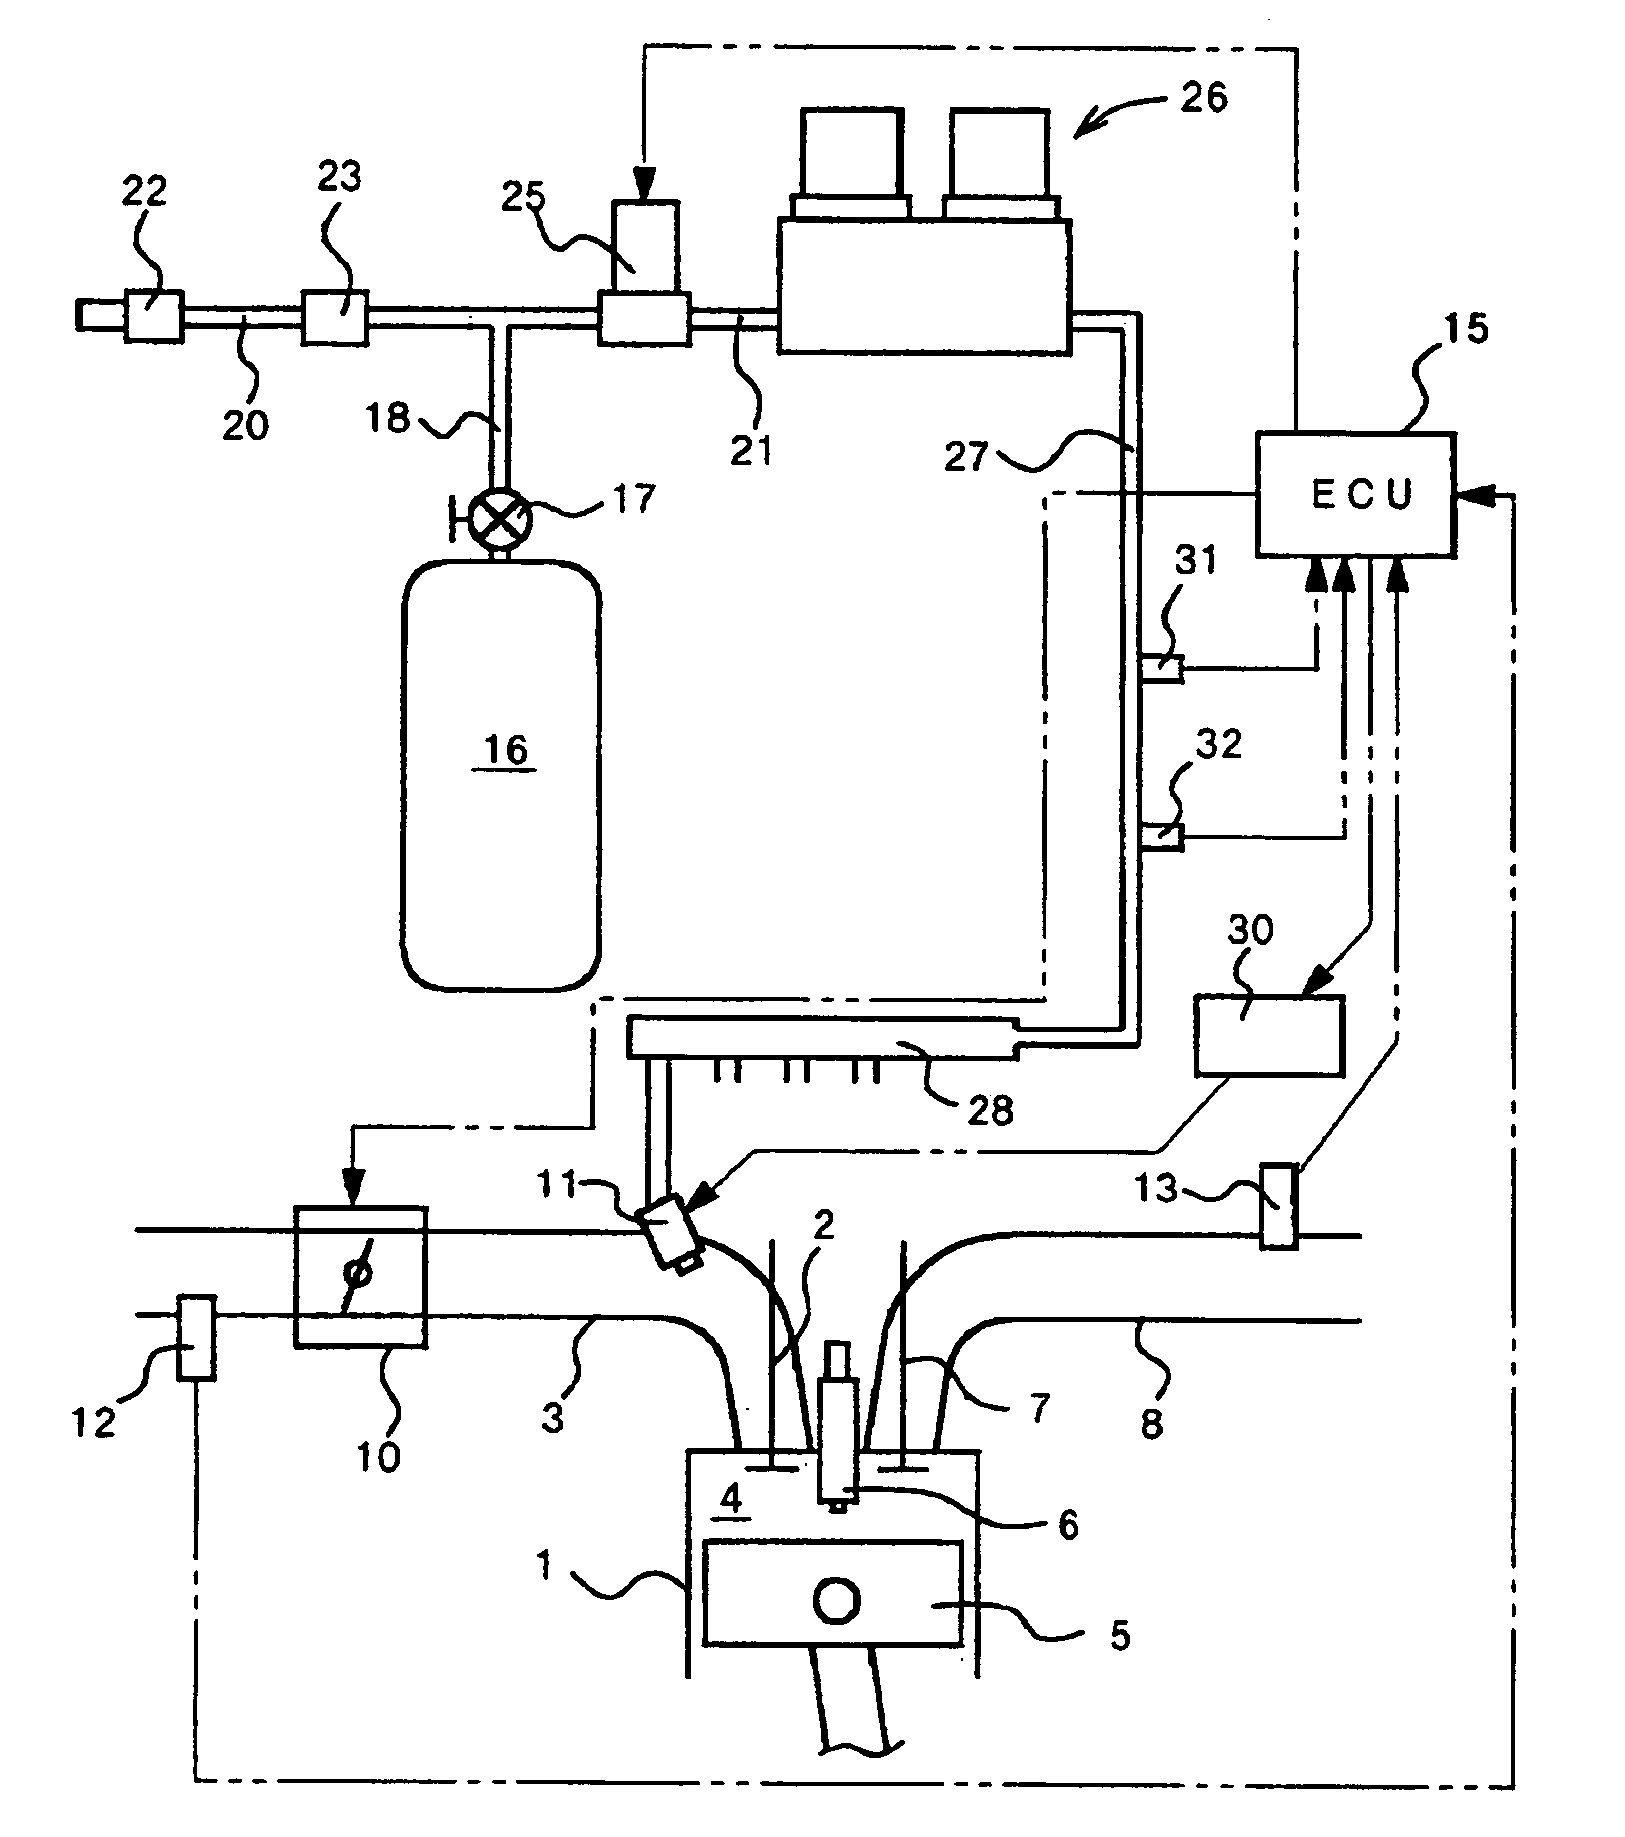 Gas fuel feed device